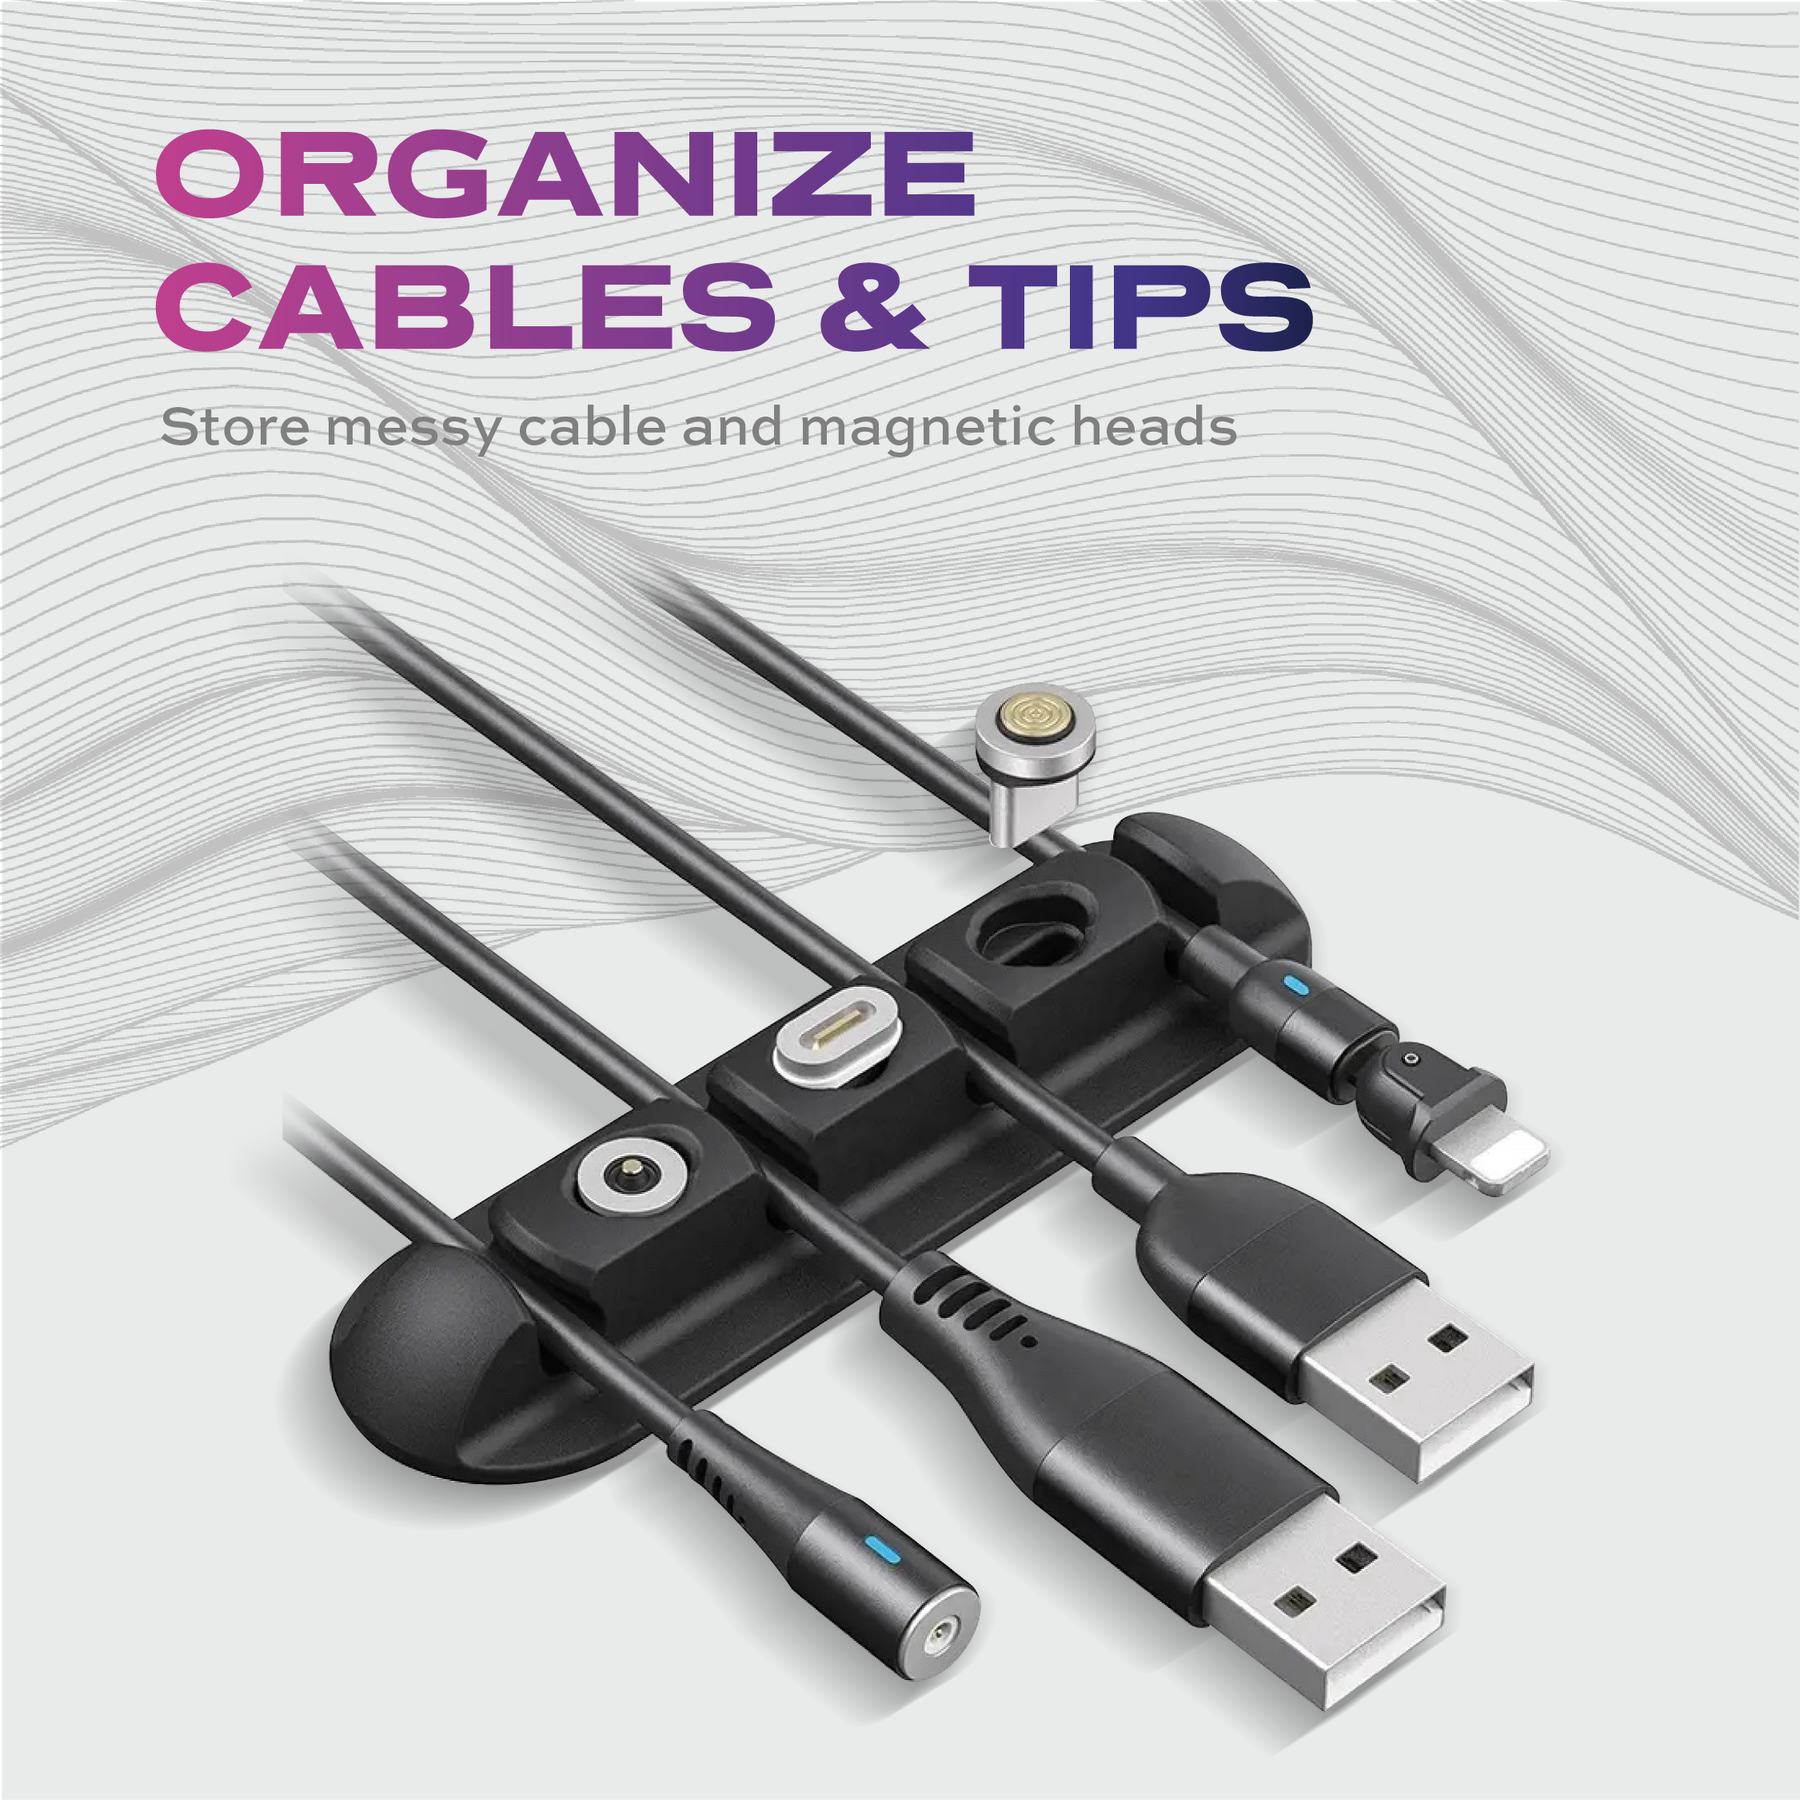 Tips and Products for Organizing Cords and Cables, Cord Management Ideas